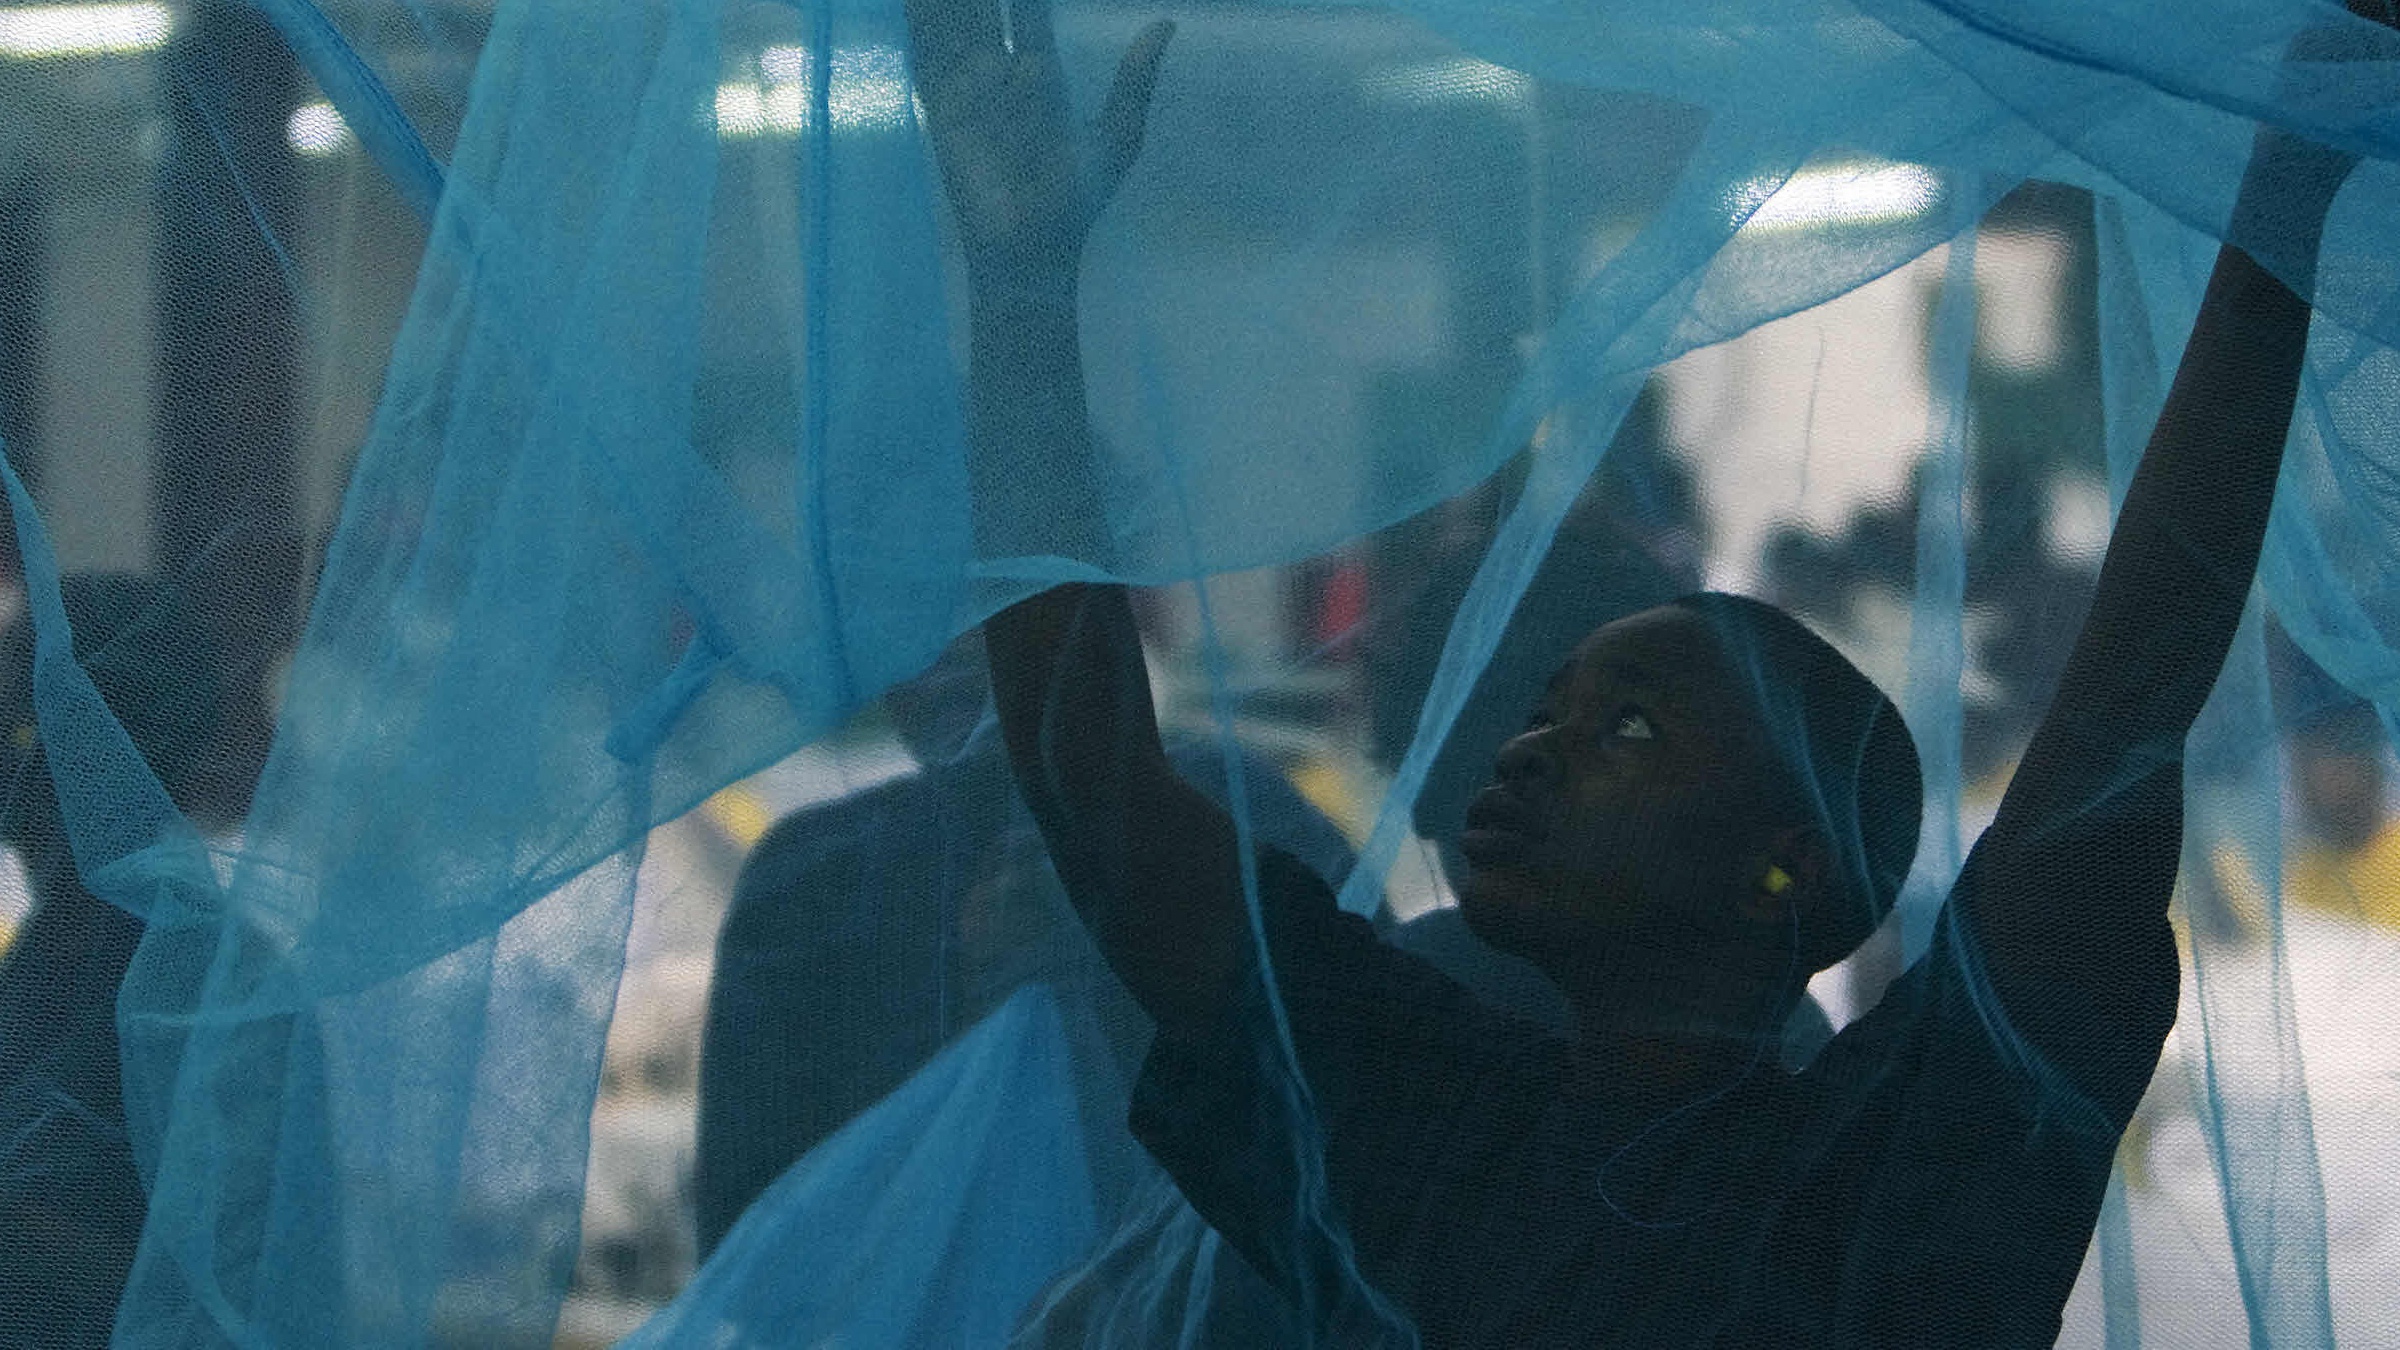 A worker inspects a mosquito net in Arusha, Tanzania